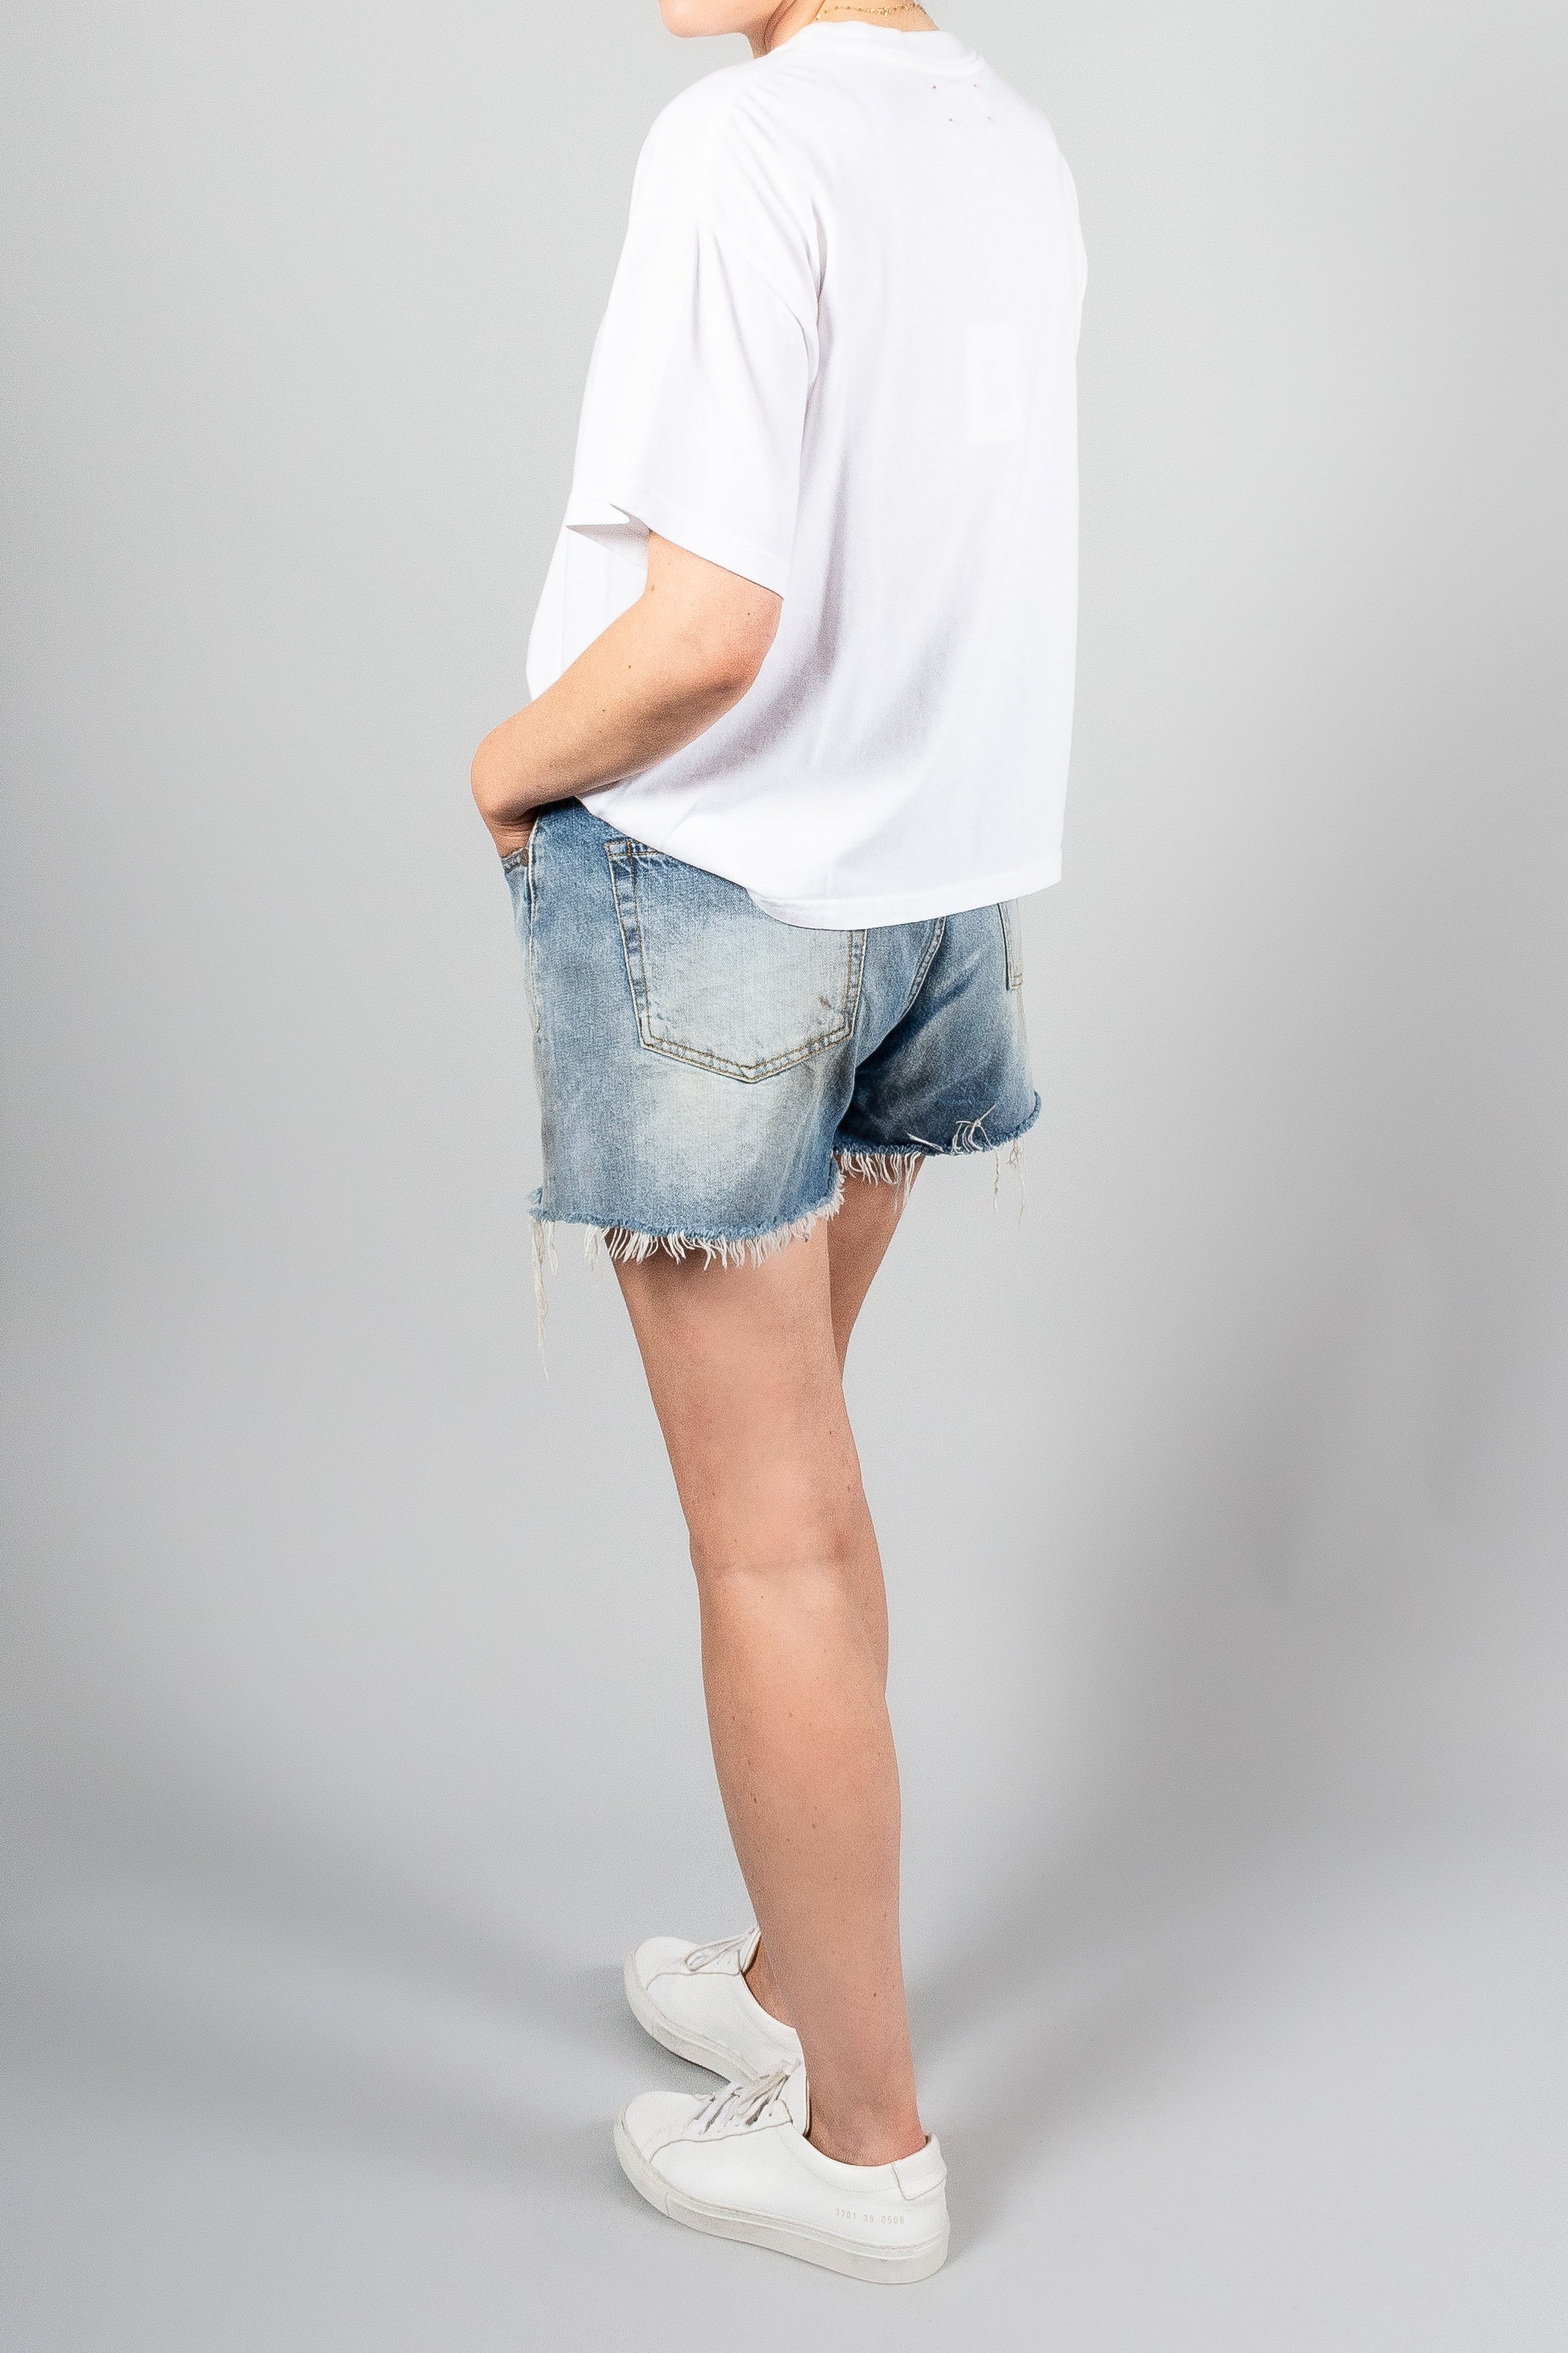 R13 Crossover Short-Pants and Shorts-Misch-Boutique-Vancouver-Canada-misch.ca